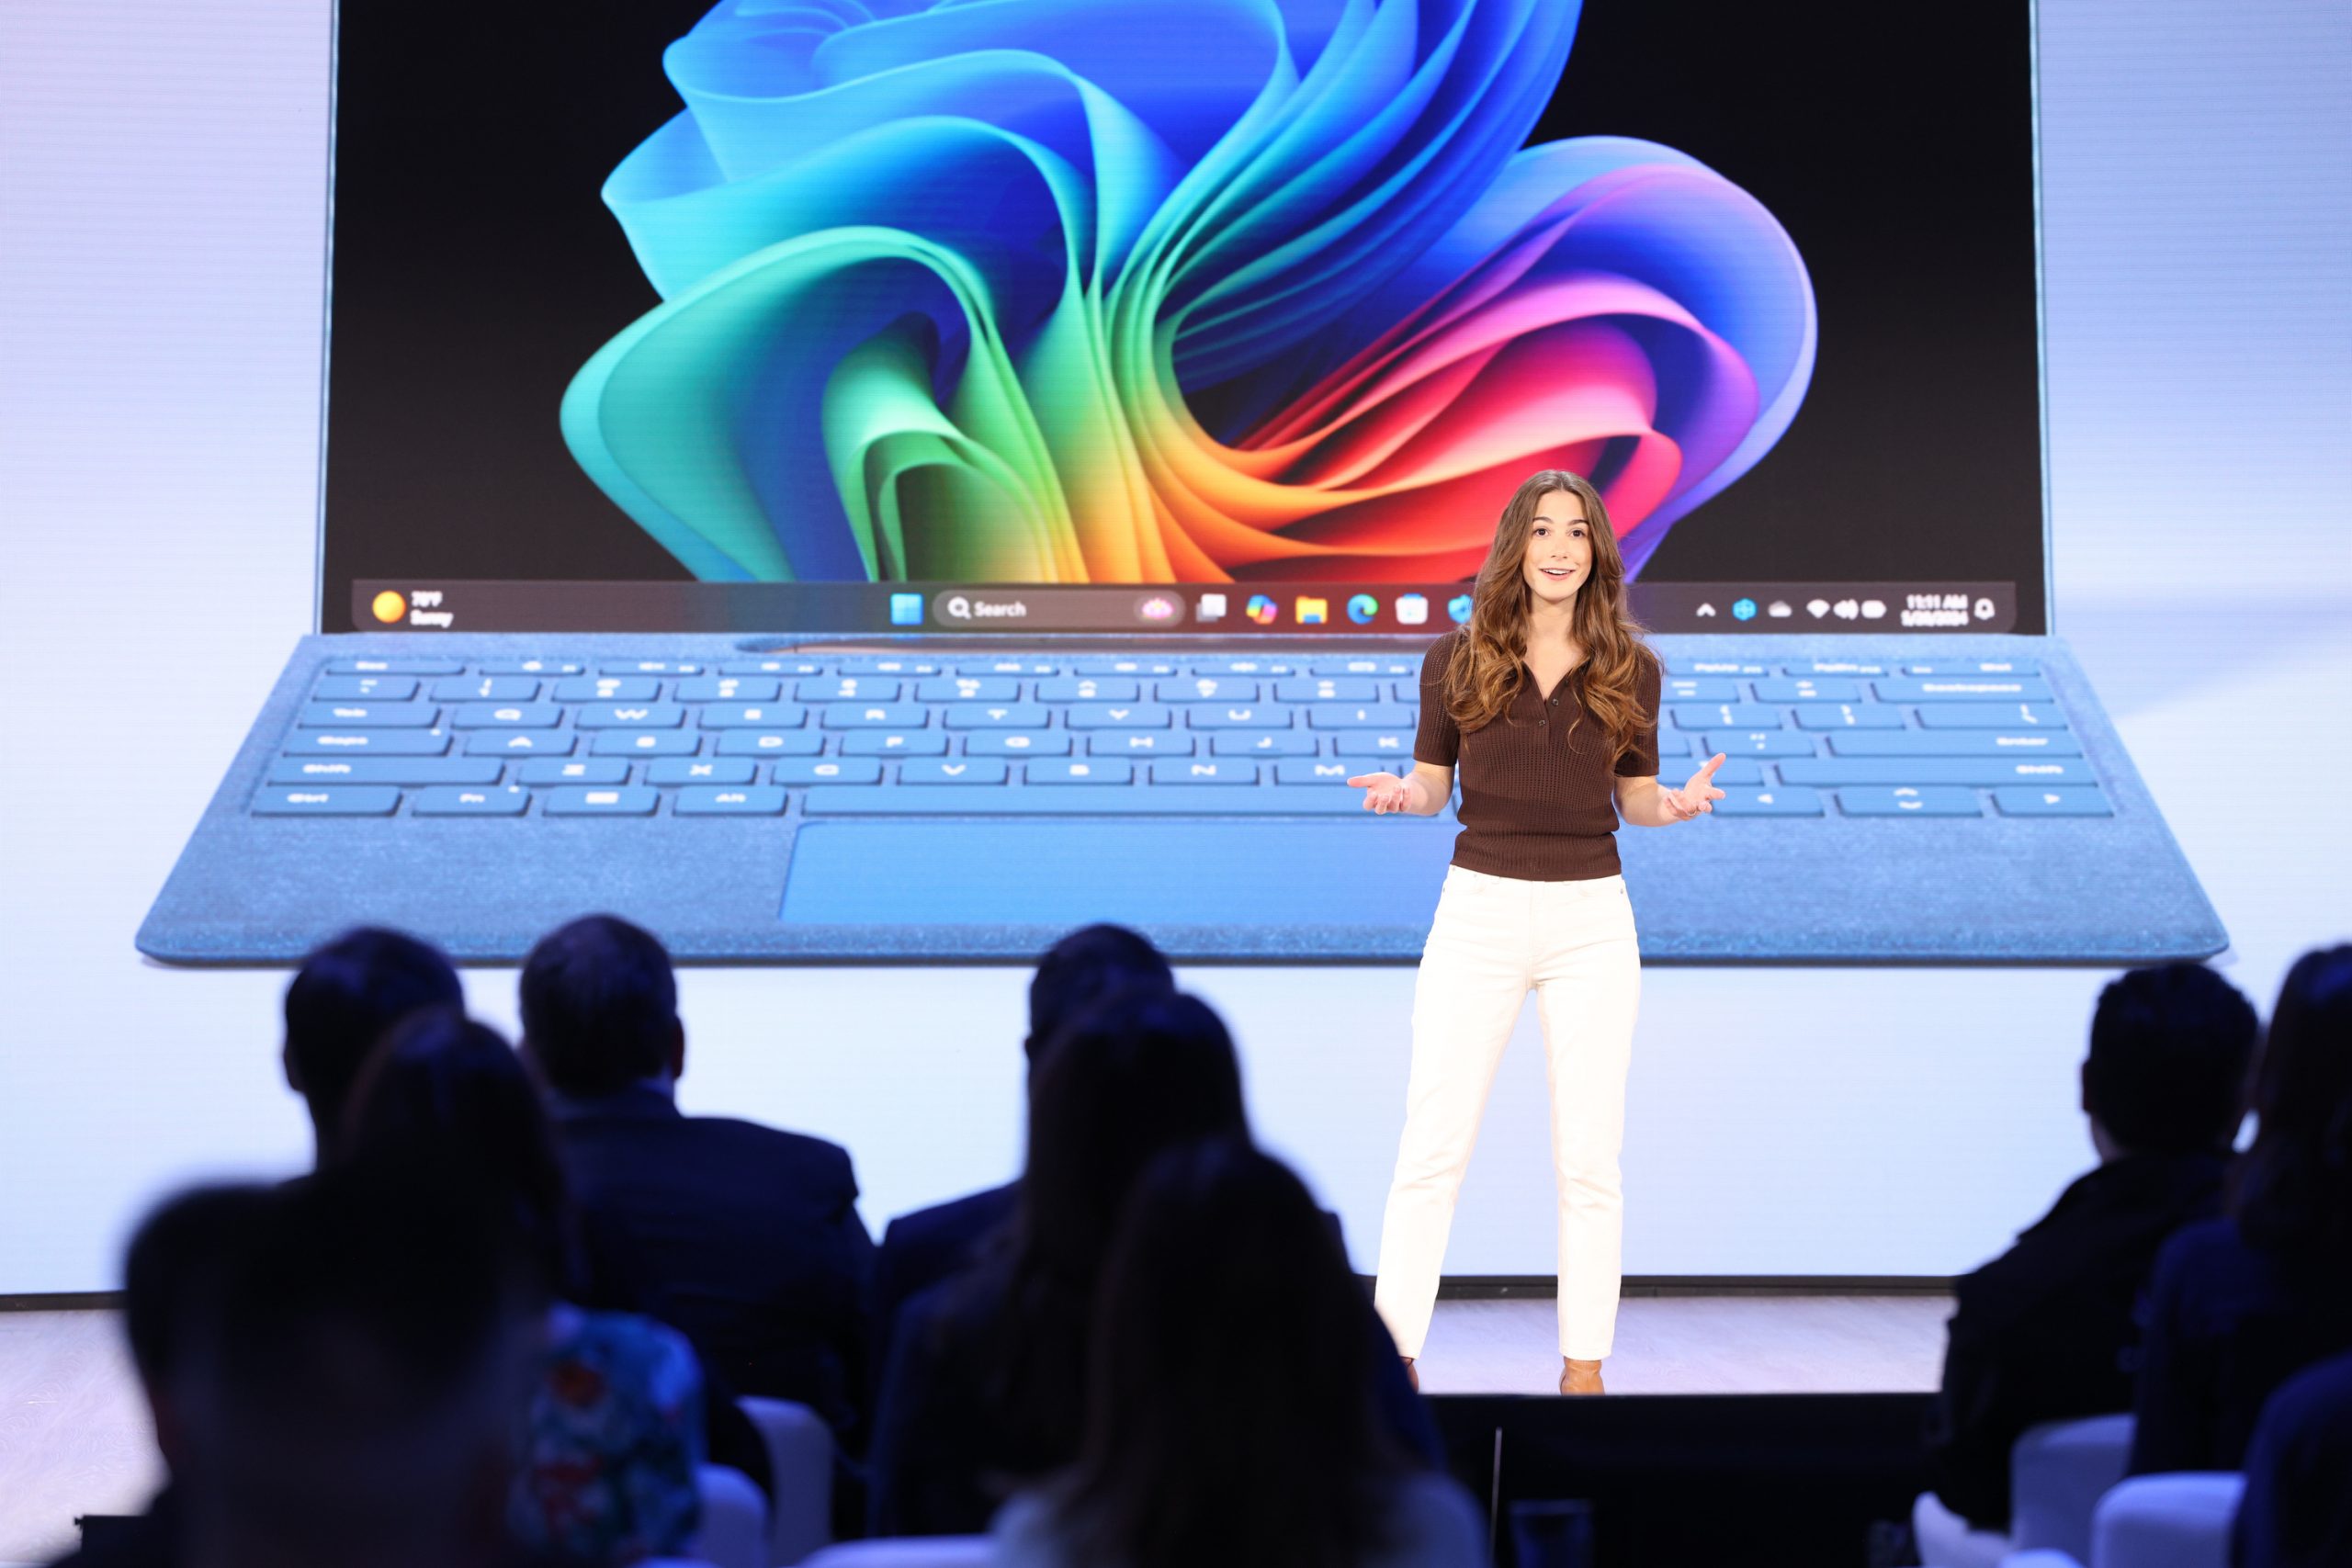 A woman standing on stage in front of an audience, with an image of a laptop on the screen behind her.